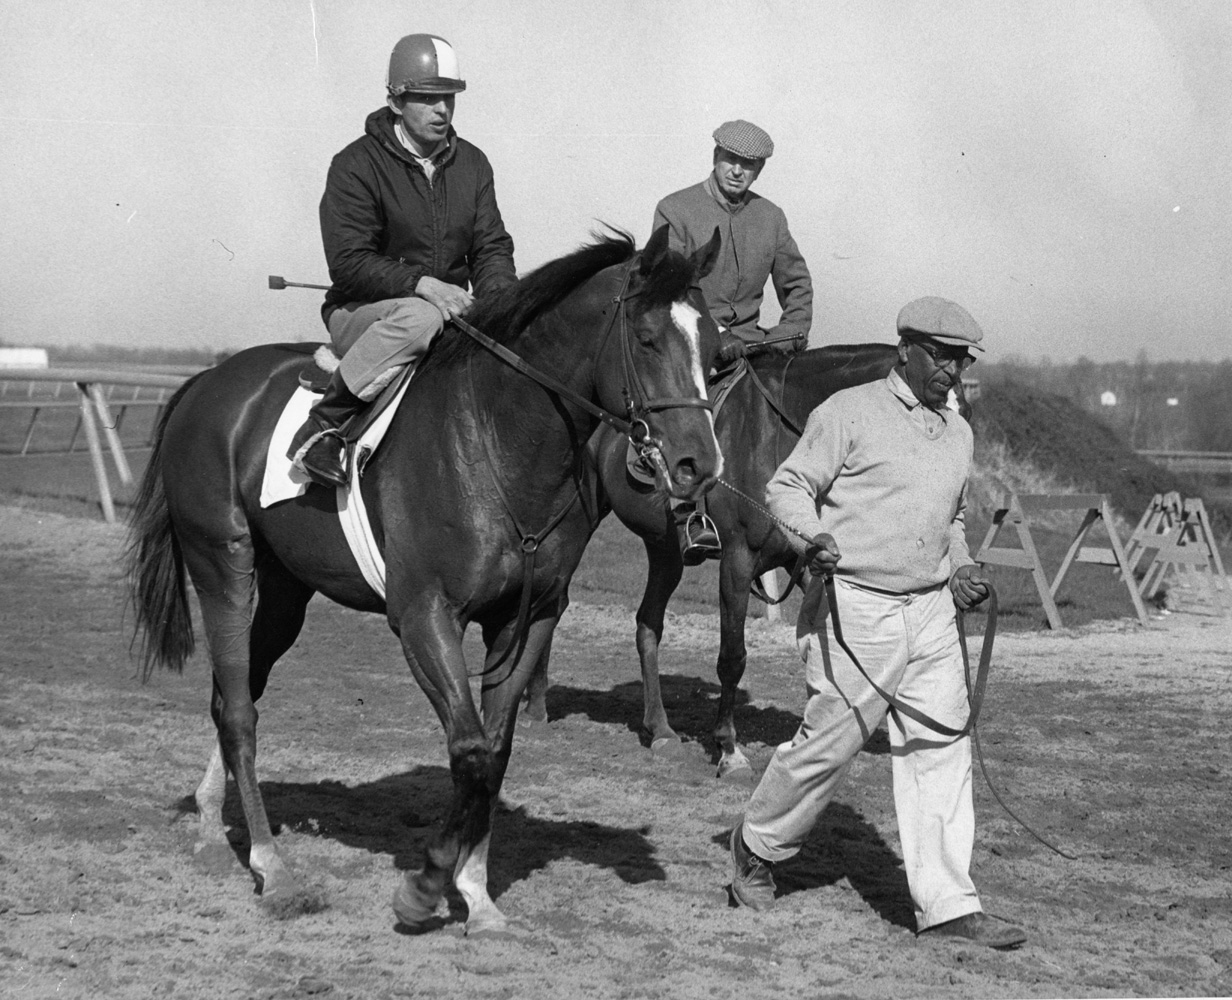 Northern Dancer in training with Hall of Fame trainer Horatio Luro on the pony nearby, April 1964 (Museum Collection)